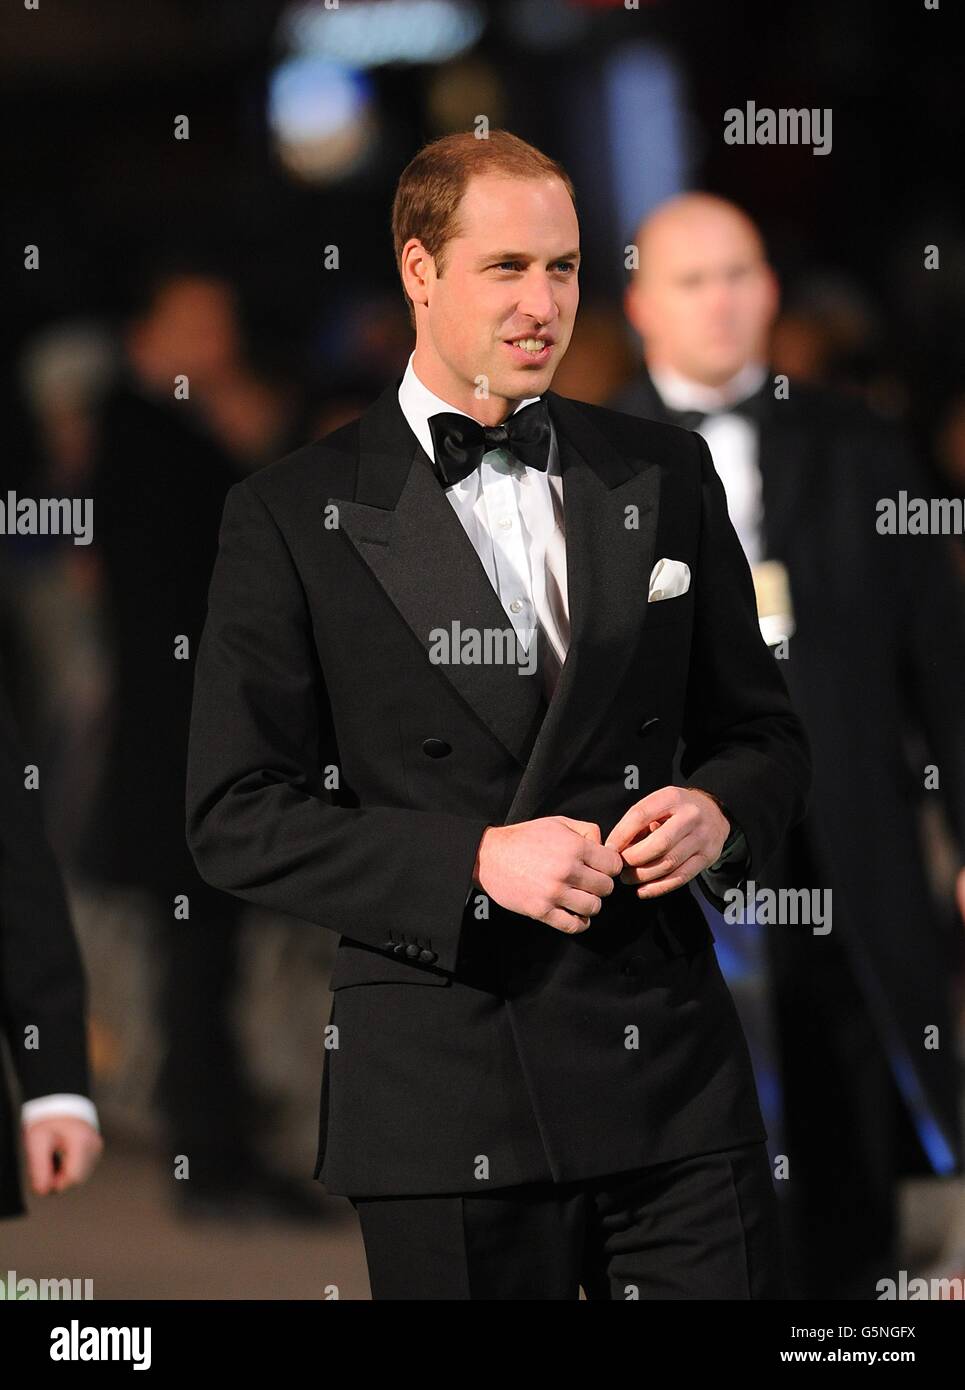 The Duke of Cambridge arriving for the UK Premiere of The Hobbit: An Unexpected Journey at the Odeon Leicester Square, London. Stock Photo